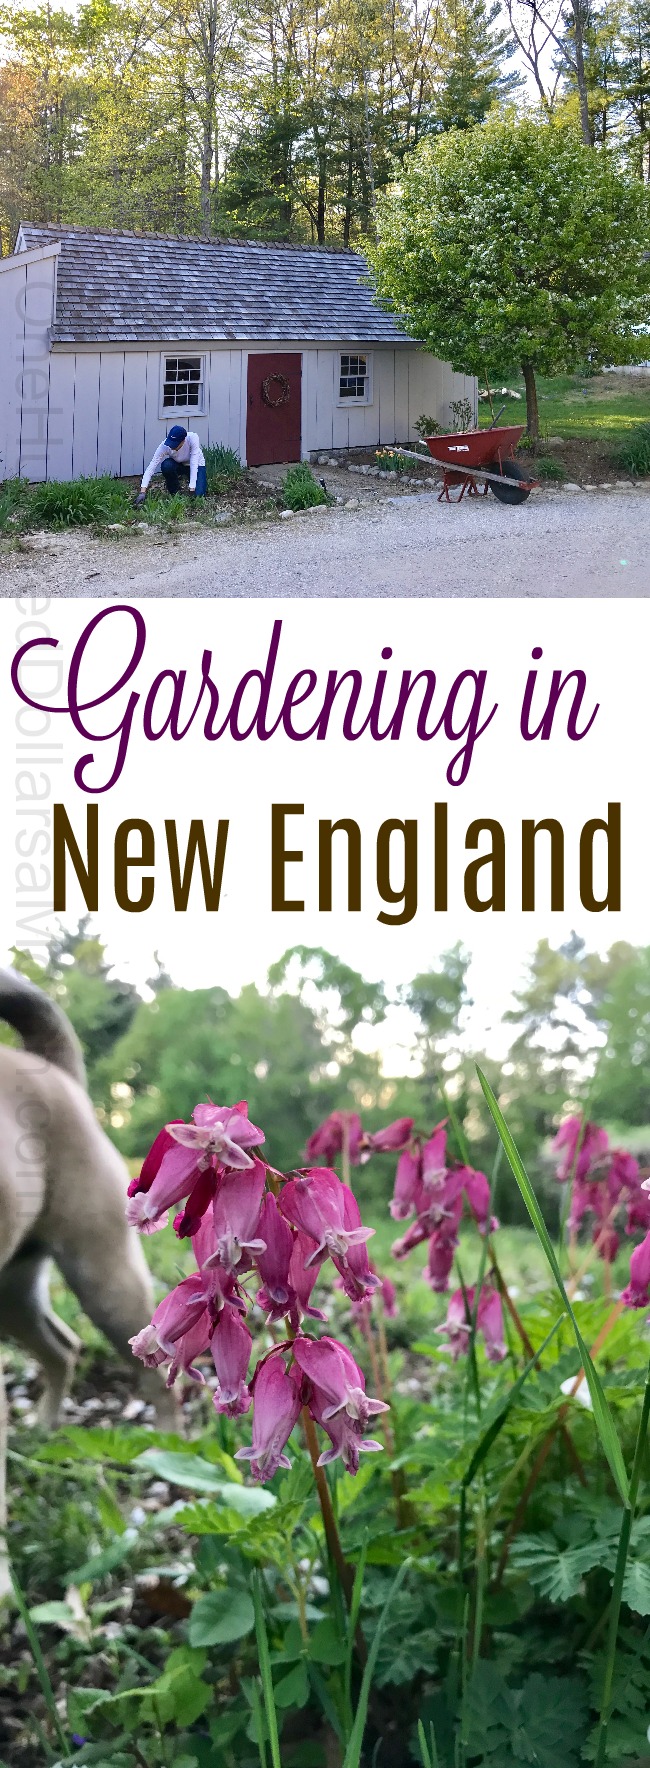 Gardening in New England – Cleaning Up the Potting Shed, Pulling Up Holly, and Mystery Plants of the Week